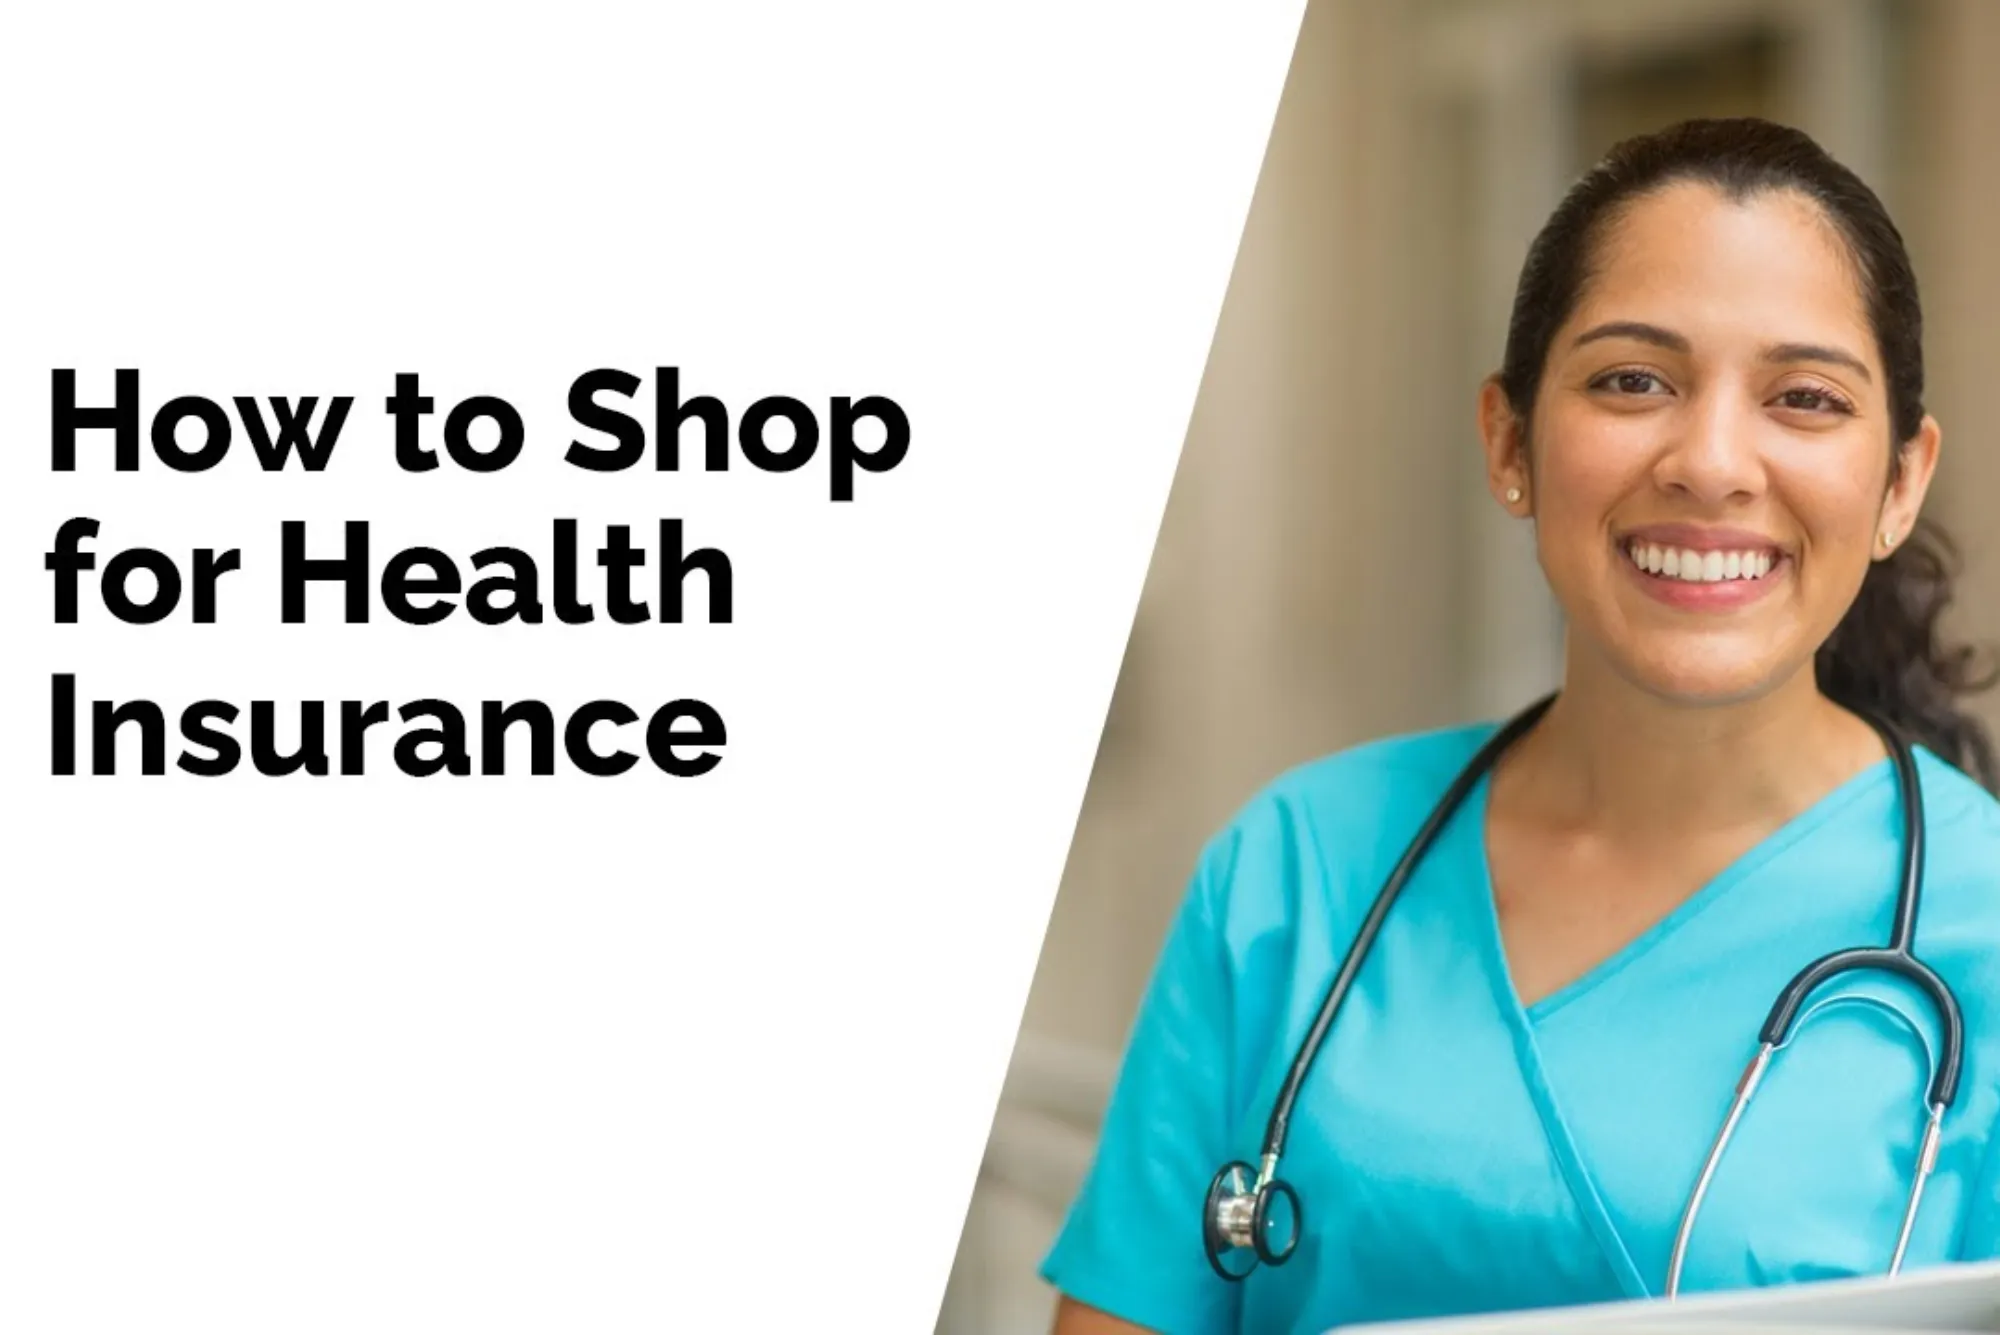 How to Shop for Health Insurance